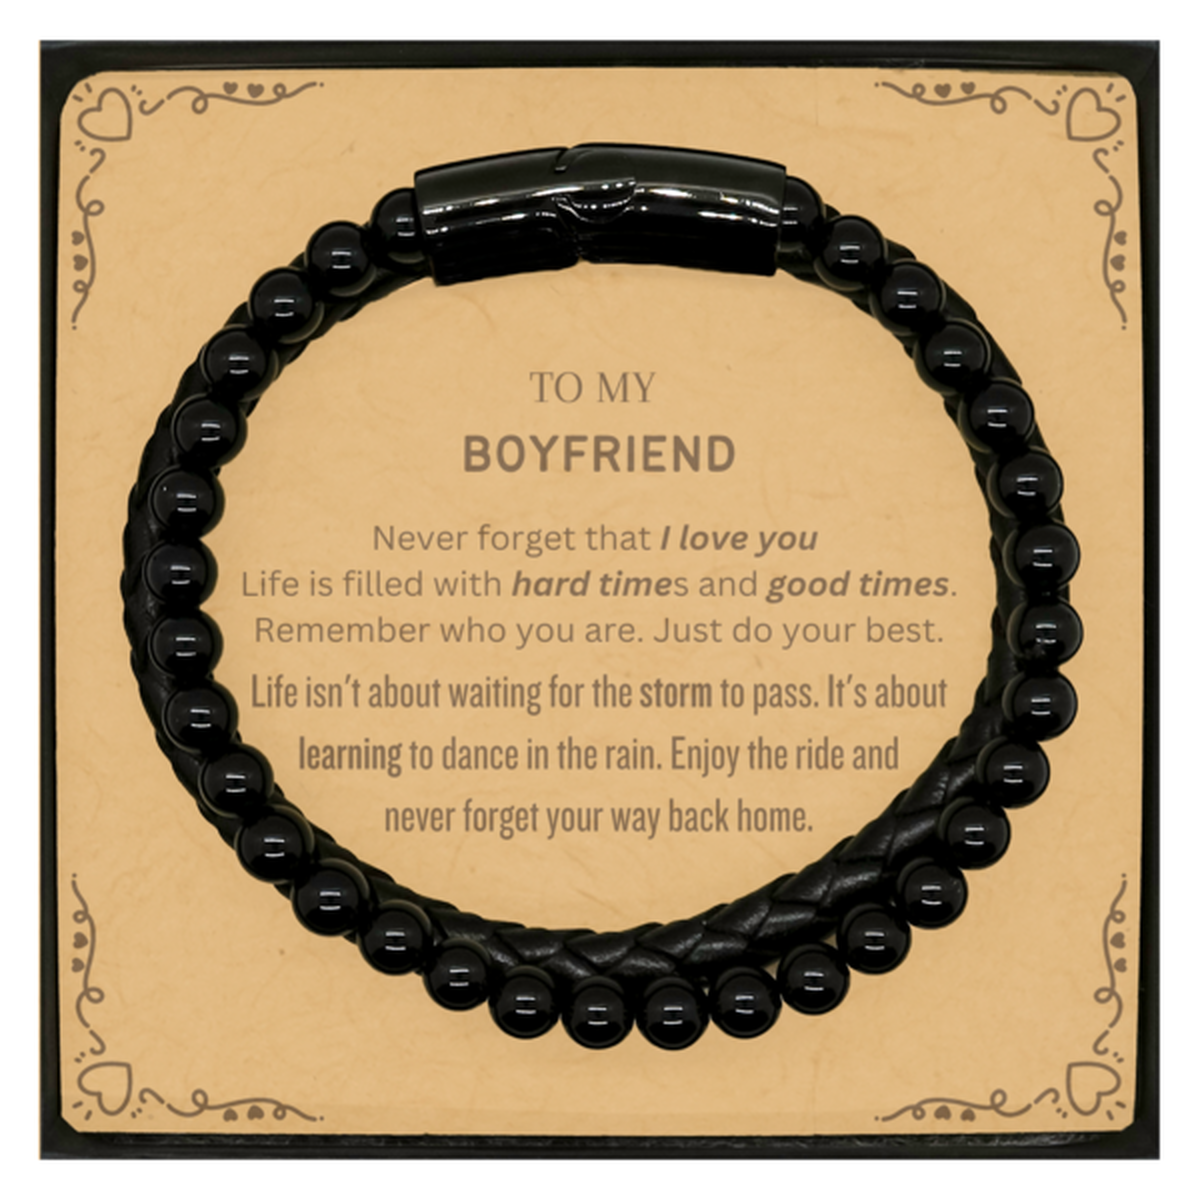 Christmas Boyfriend Stone Leather Bracelets Gifts, To My Boyfriend Birthday Thank You Gifts For Boyfriend, Graduation Unique Gifts For Boyfriend To My Boyfriend Never forget that I love you life is filled with hard times and good times. Remember who you a